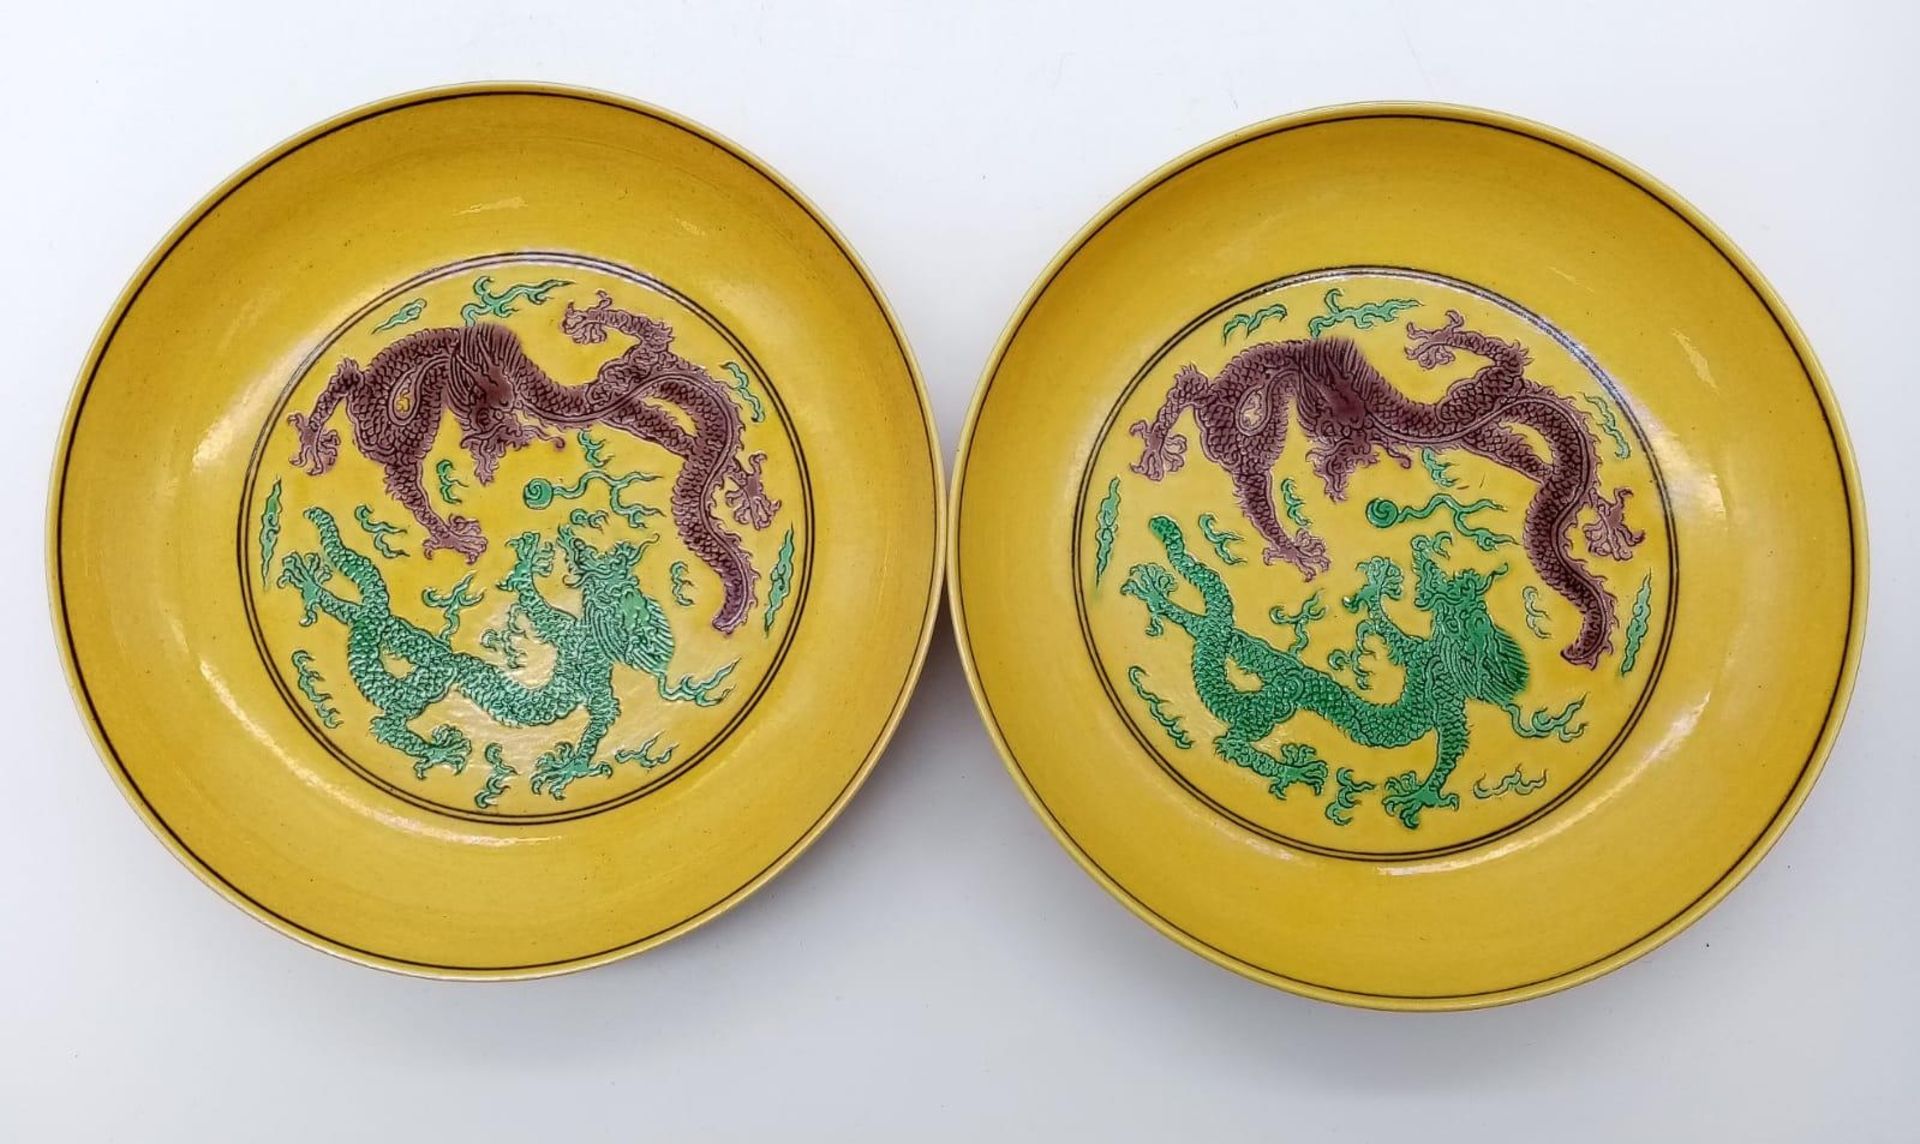 A pair of stunning Chinese Porcelain Sauce Bowls. A rare find with such rich colours, these sauce